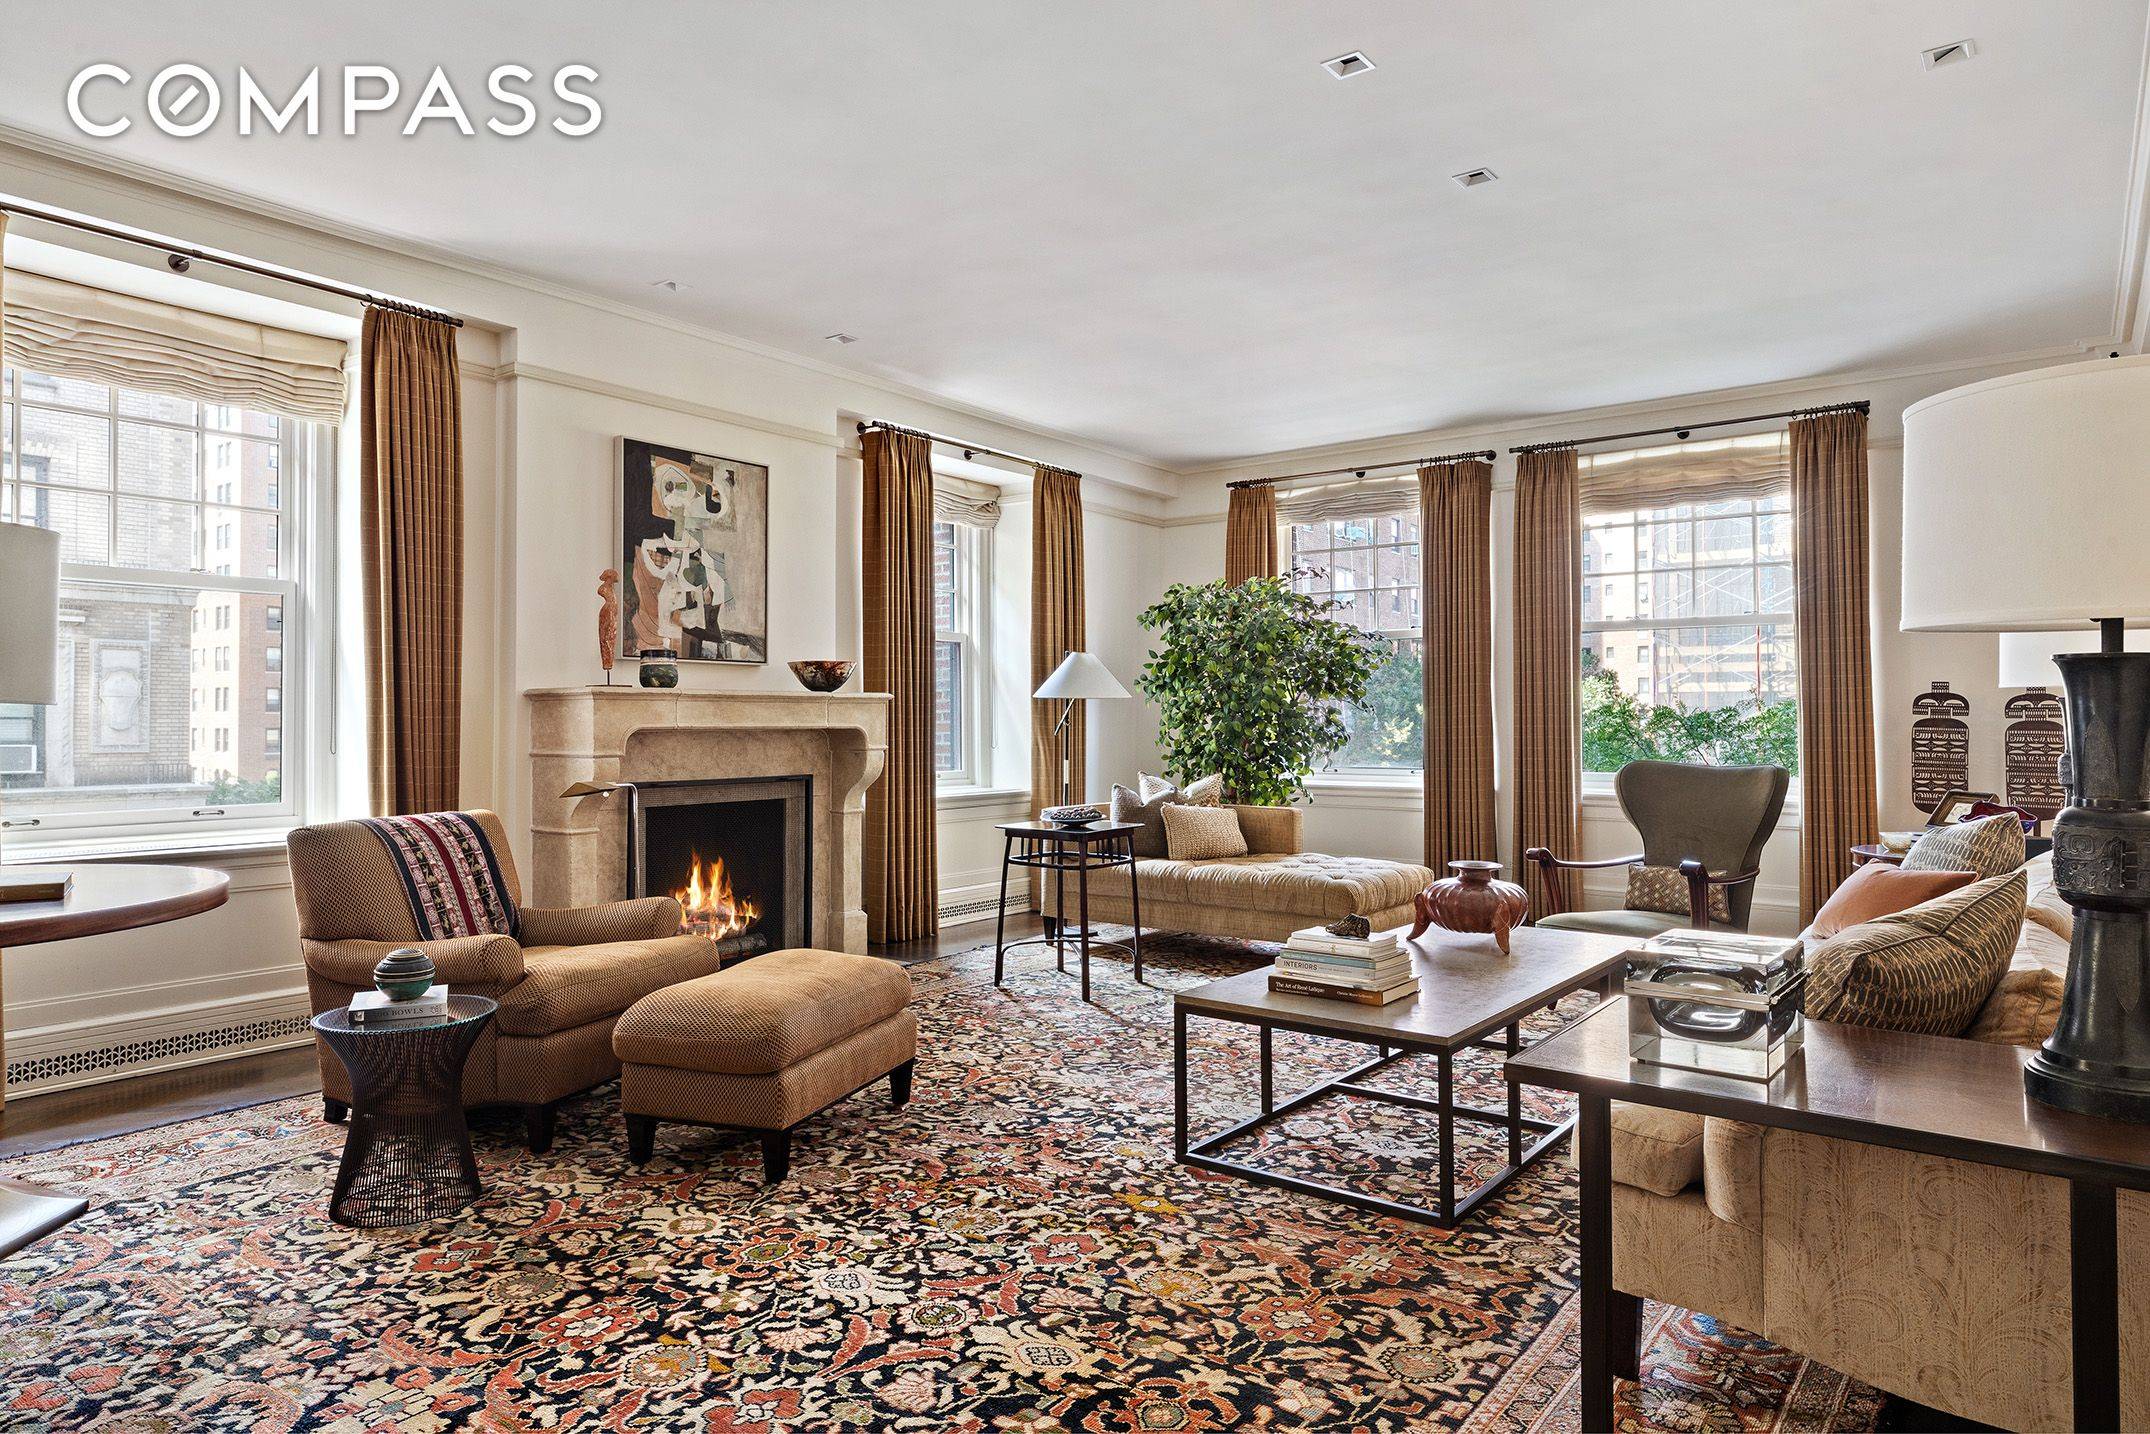 This exquisite, mint 10 room home, located in a premier Upper West Side prewar coop, will take your breath away.